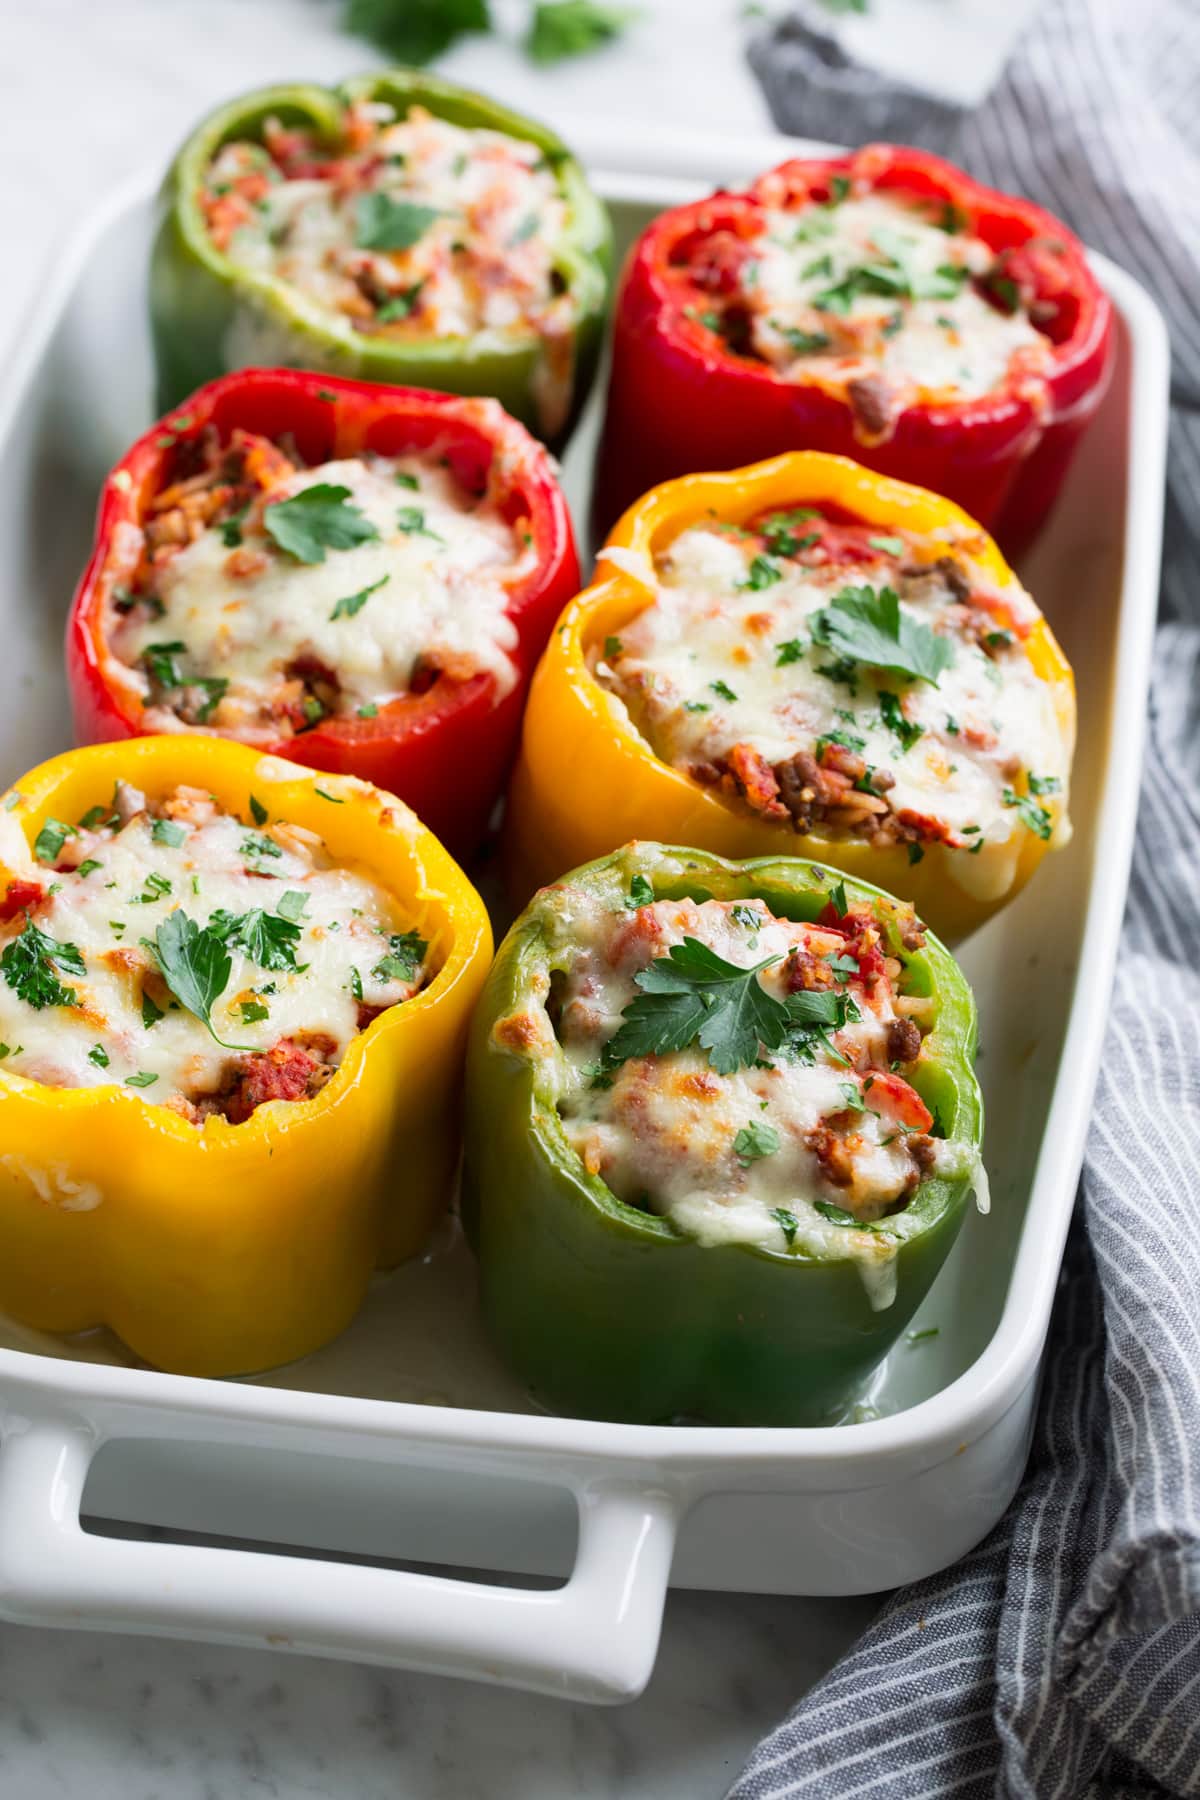 Stuffed Peppers Recipe - Cooking Classy